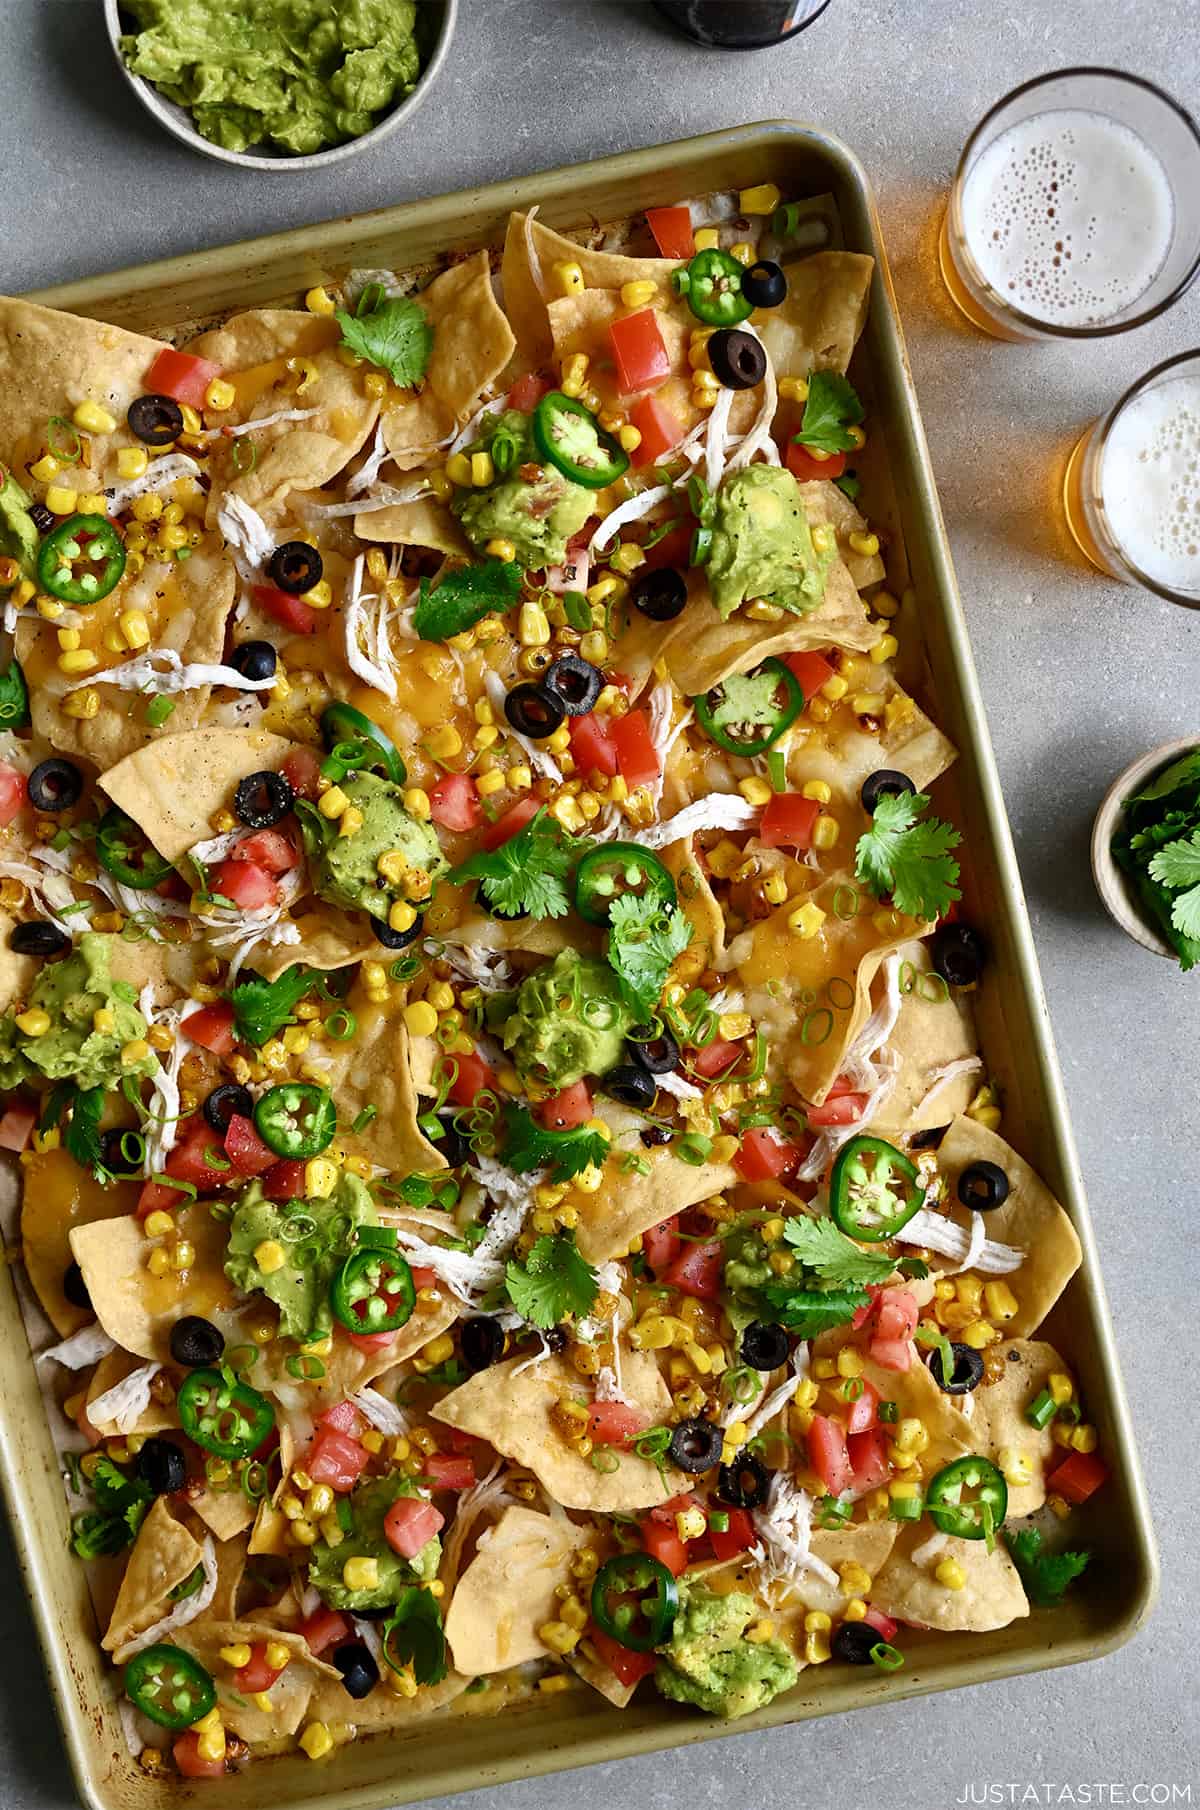 Sheet pan nachos loaded with sliced jalapeños, diced tomatoes, black olives and guacamole next to two glasses filled with light beer.